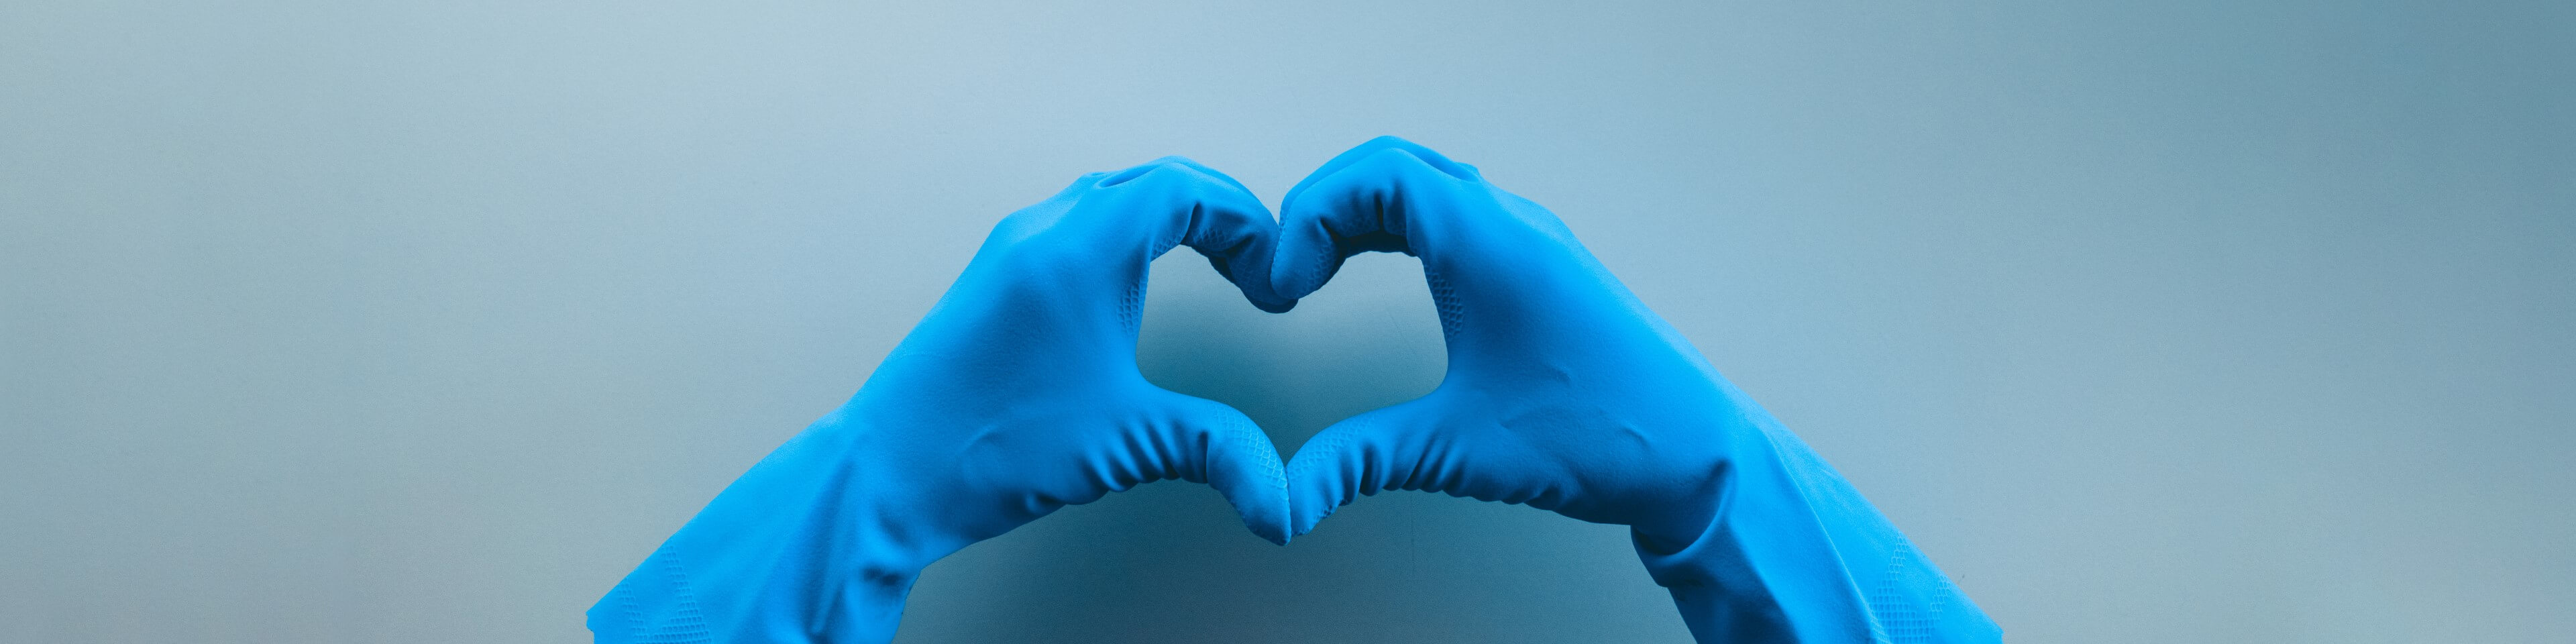 Nurse wearing protective gloves forming a heart